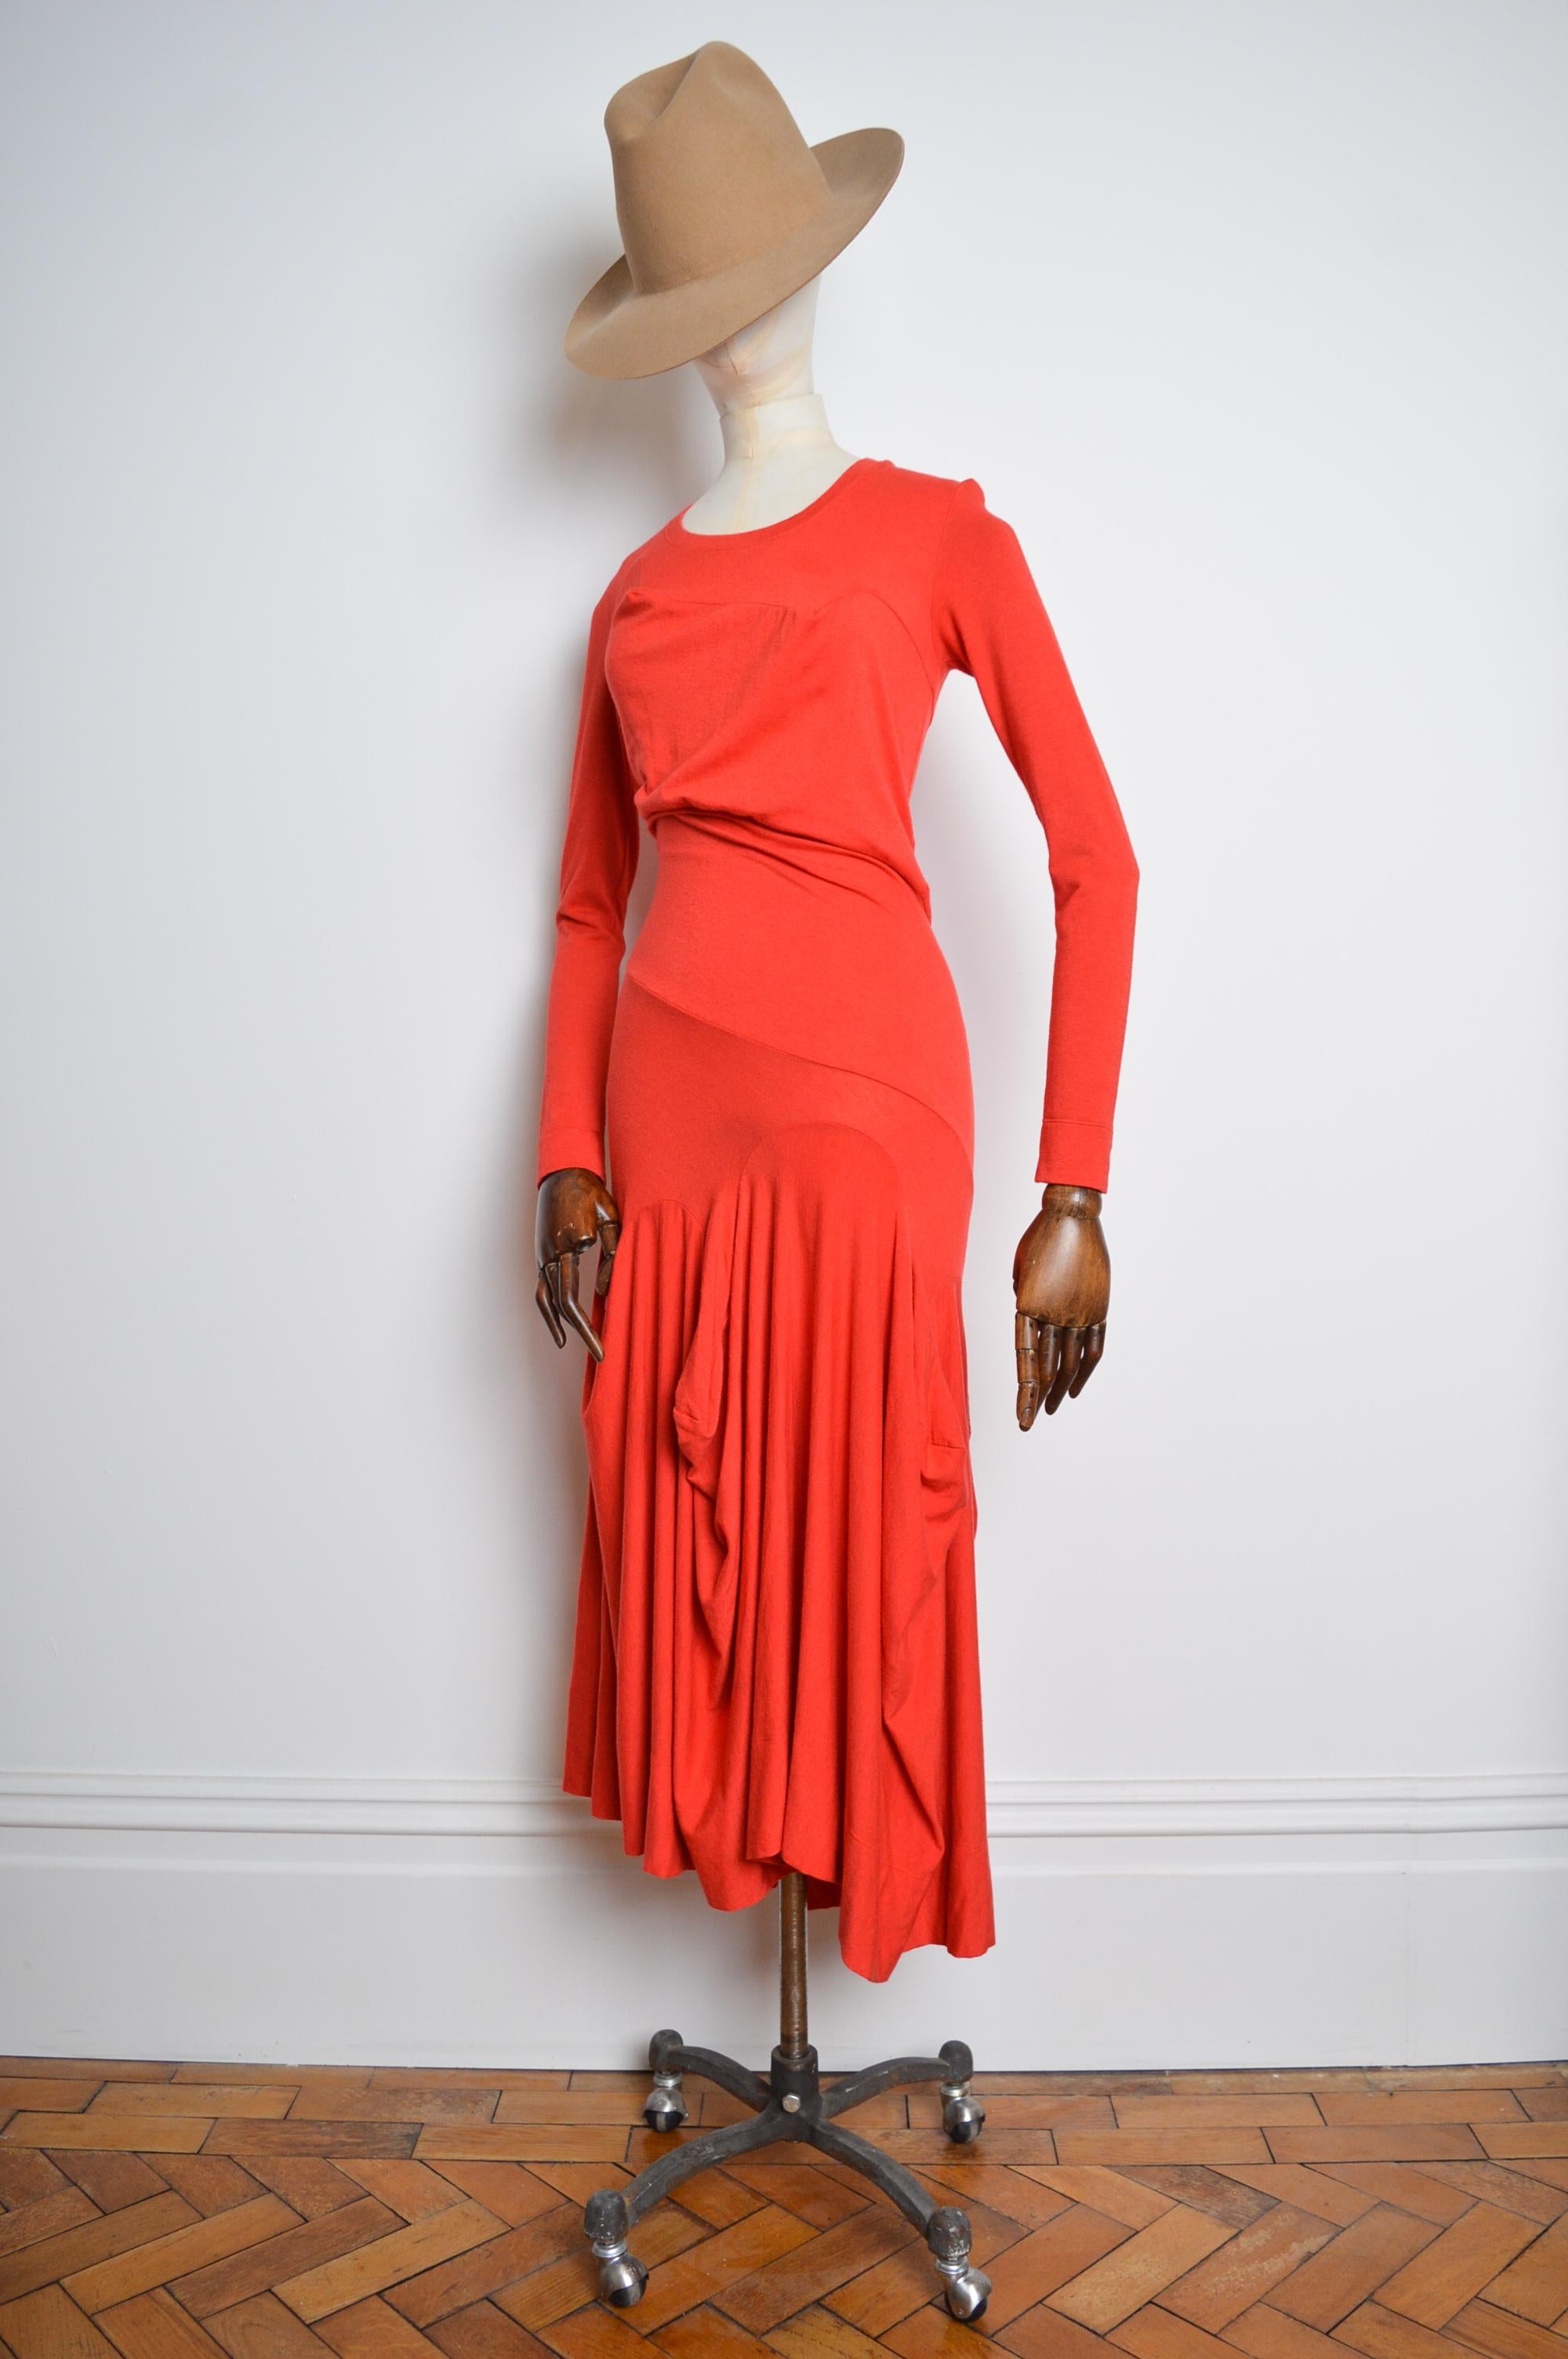 Beautiful Vintage long sleeved avant guard maxi Dress from F/W 2008 by Vivienne Westwood (Look 35). 

This beautiful, long sleeved full length Dress is crafted from a mixture of wool and other elasticated fibres giving an almost jersey like material